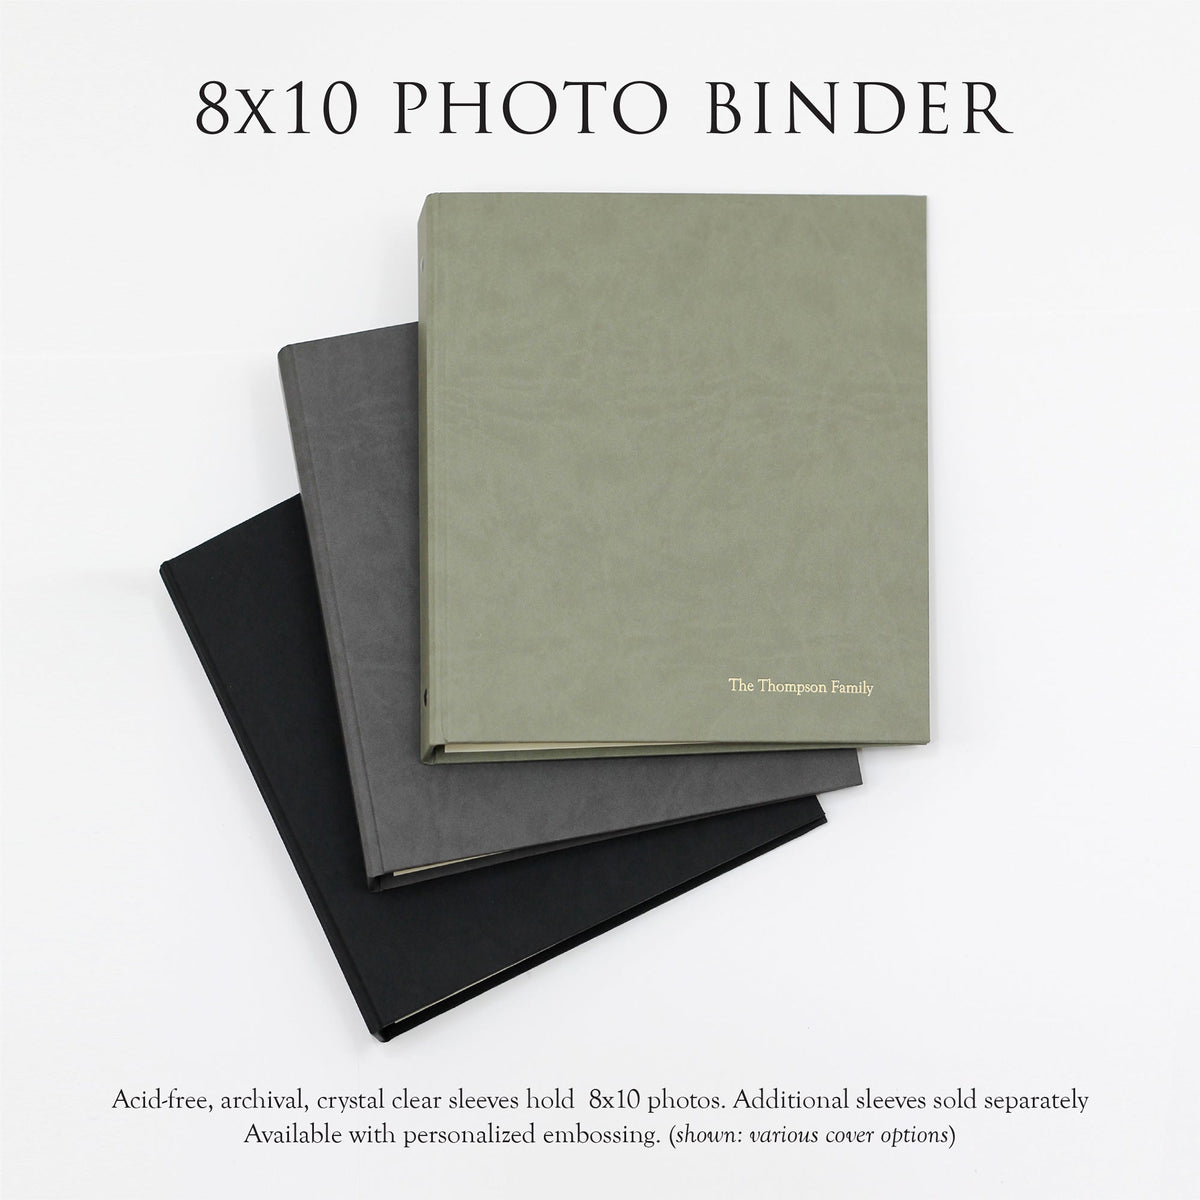 Large Photo Binder For 8x10 Photos | Cover: Pearl Vegan Leather | Available Personalized